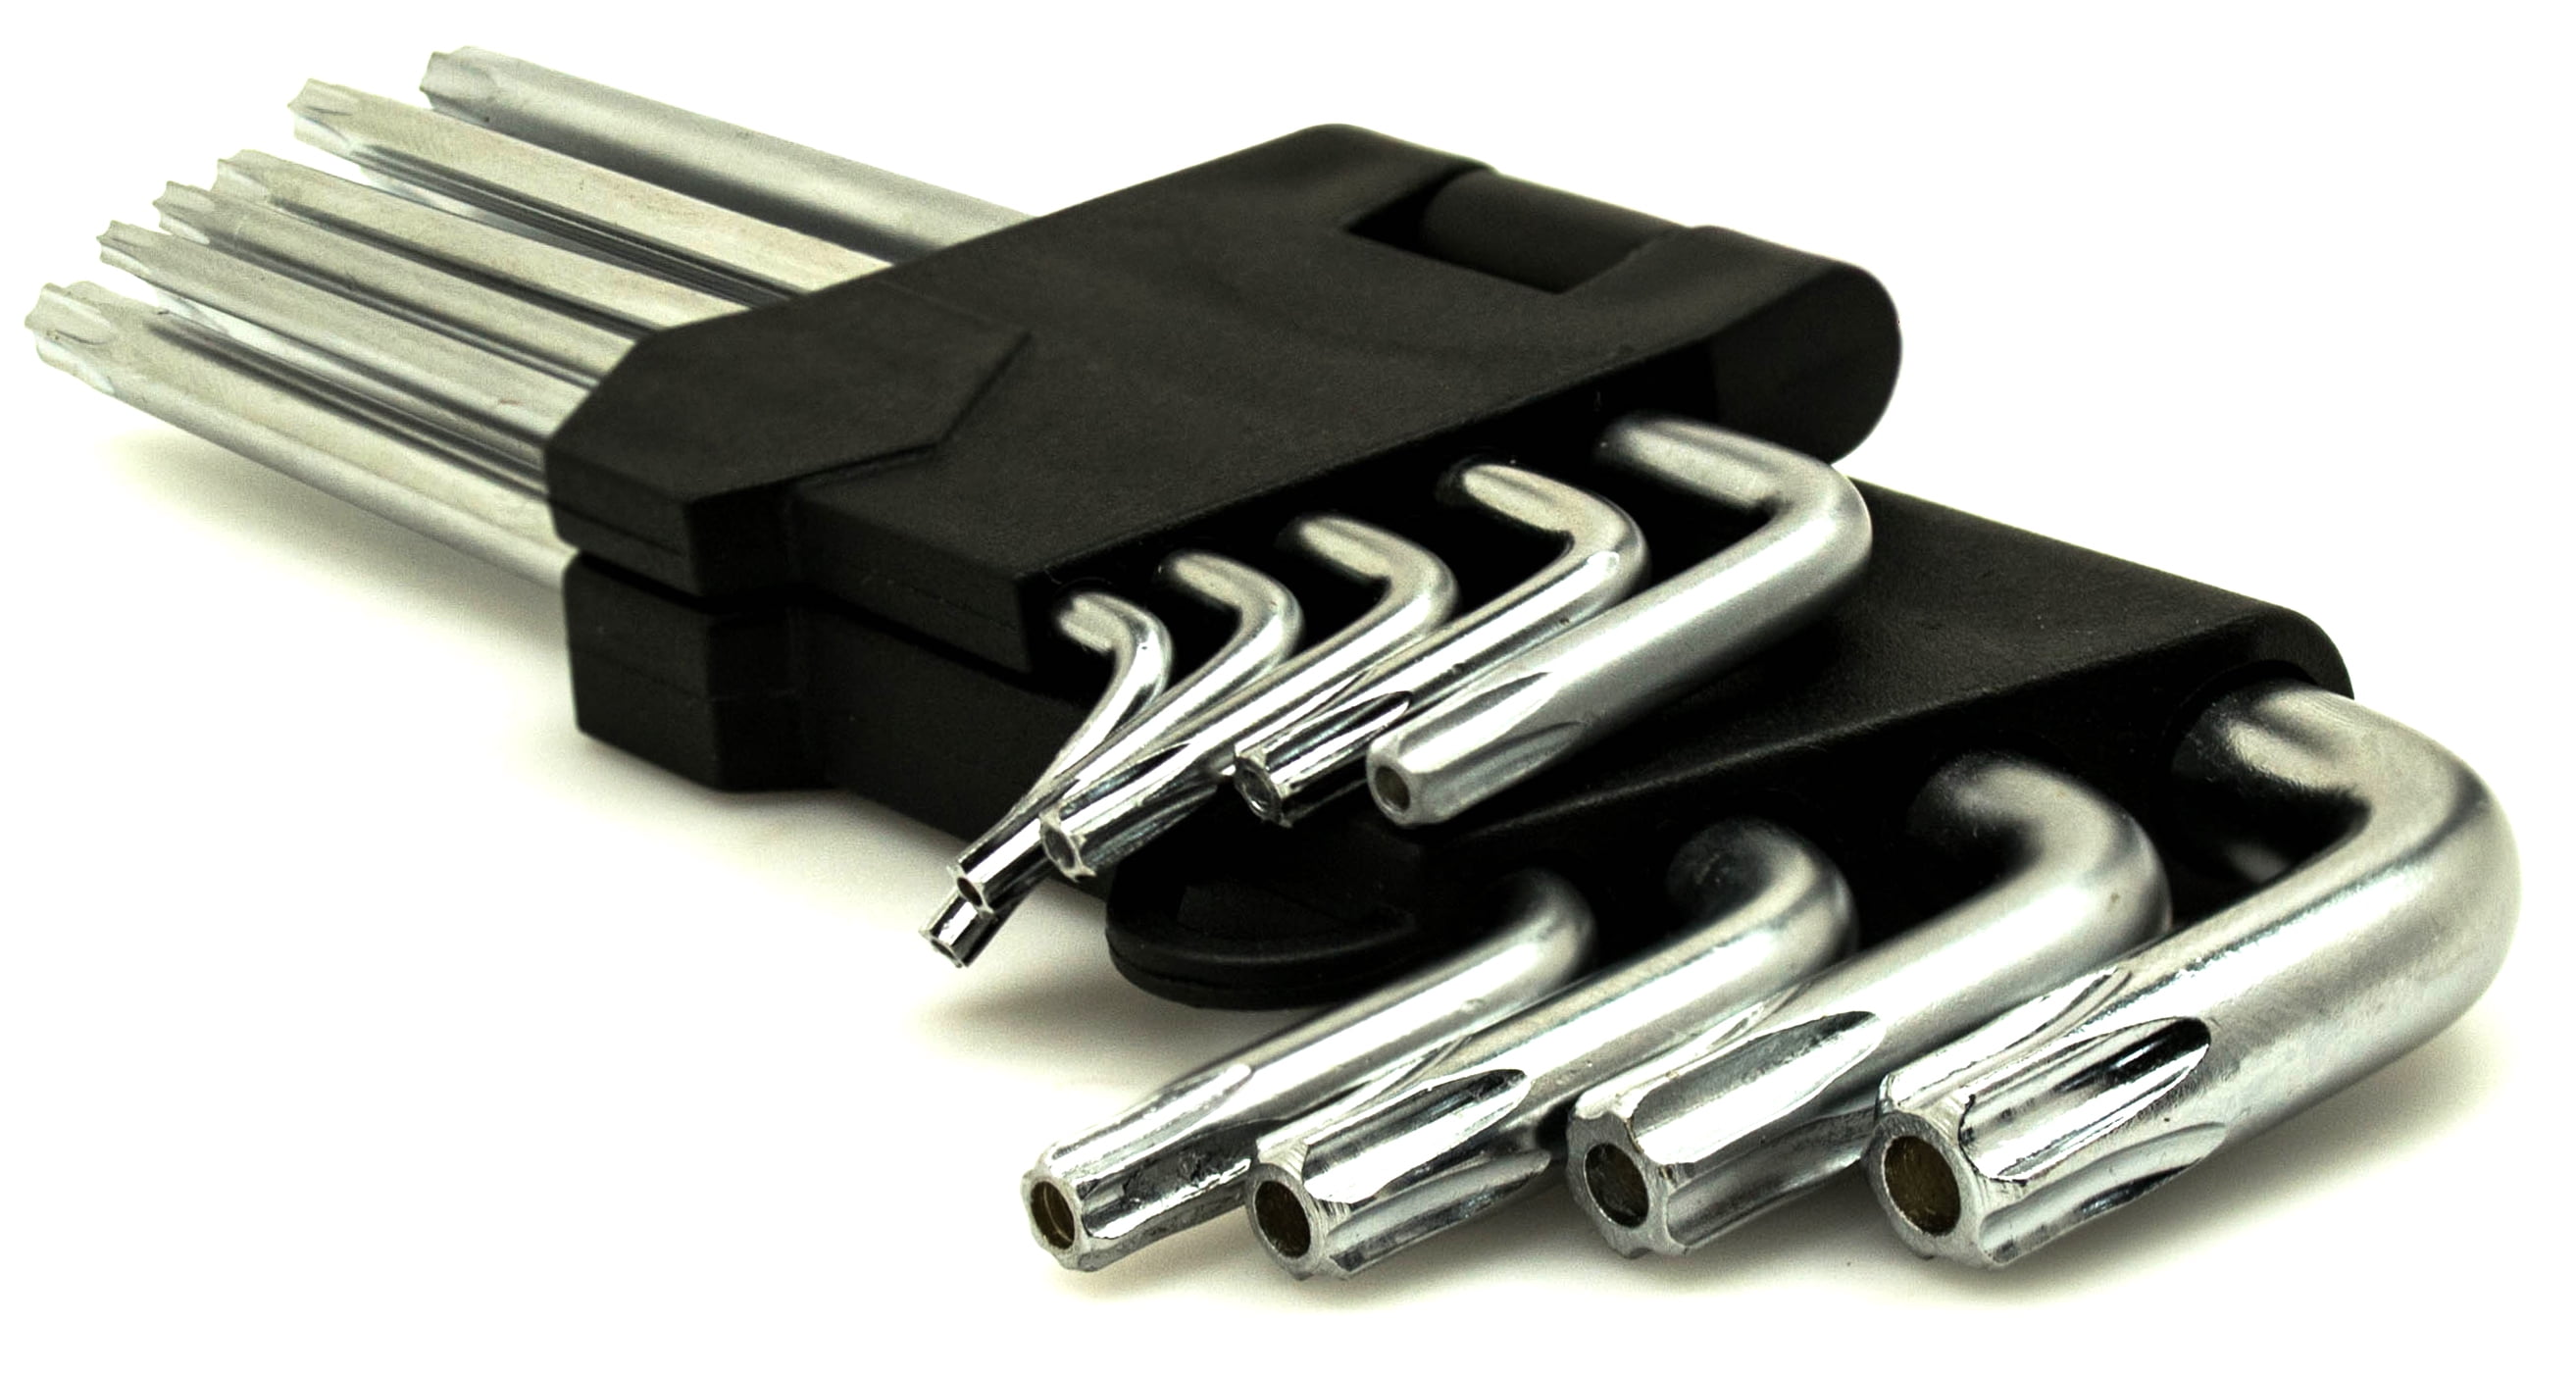 T20 T27 T15 T45 & T50 T30 Tamper Proof Star Key Wrench Set with Holes on Both Ends T10 HemBorta® Security Torx Key Set 9pcs Torx Allen Key Set T10-T50 Long Star Keys CRV Steel T25 T40